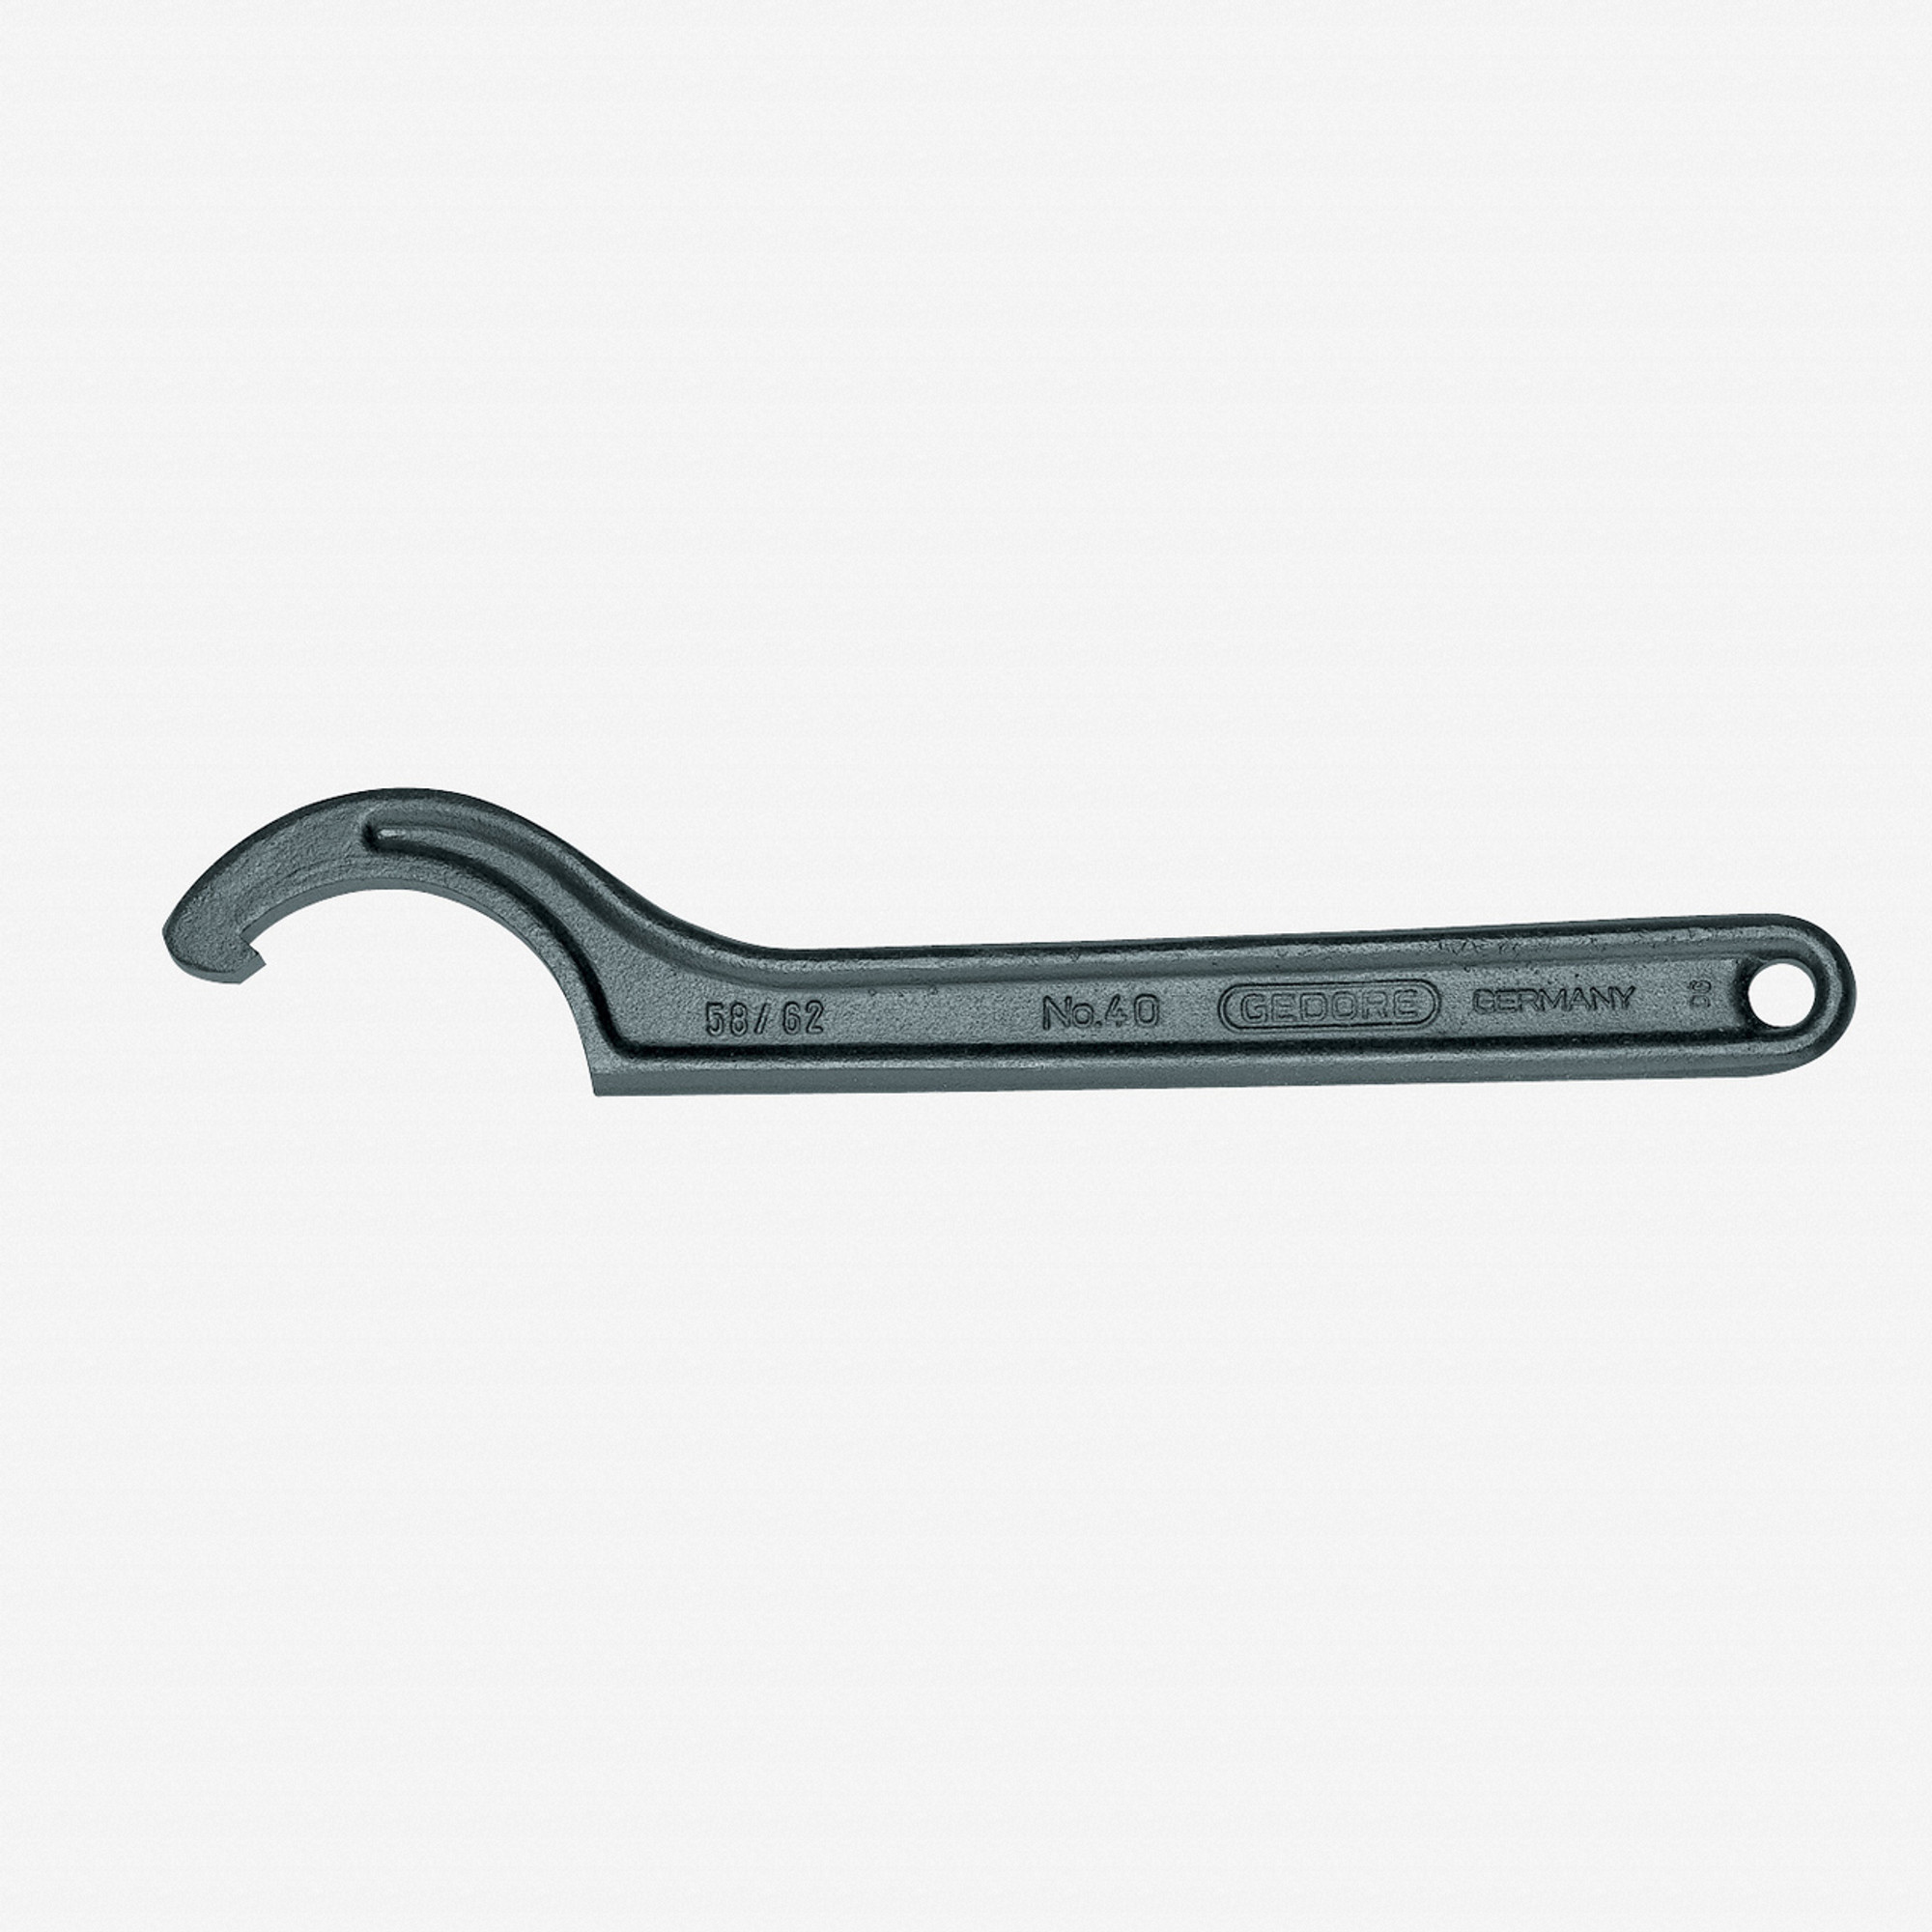 Gedore 40 155-165 Hook wrench with lug, 155-165 mm